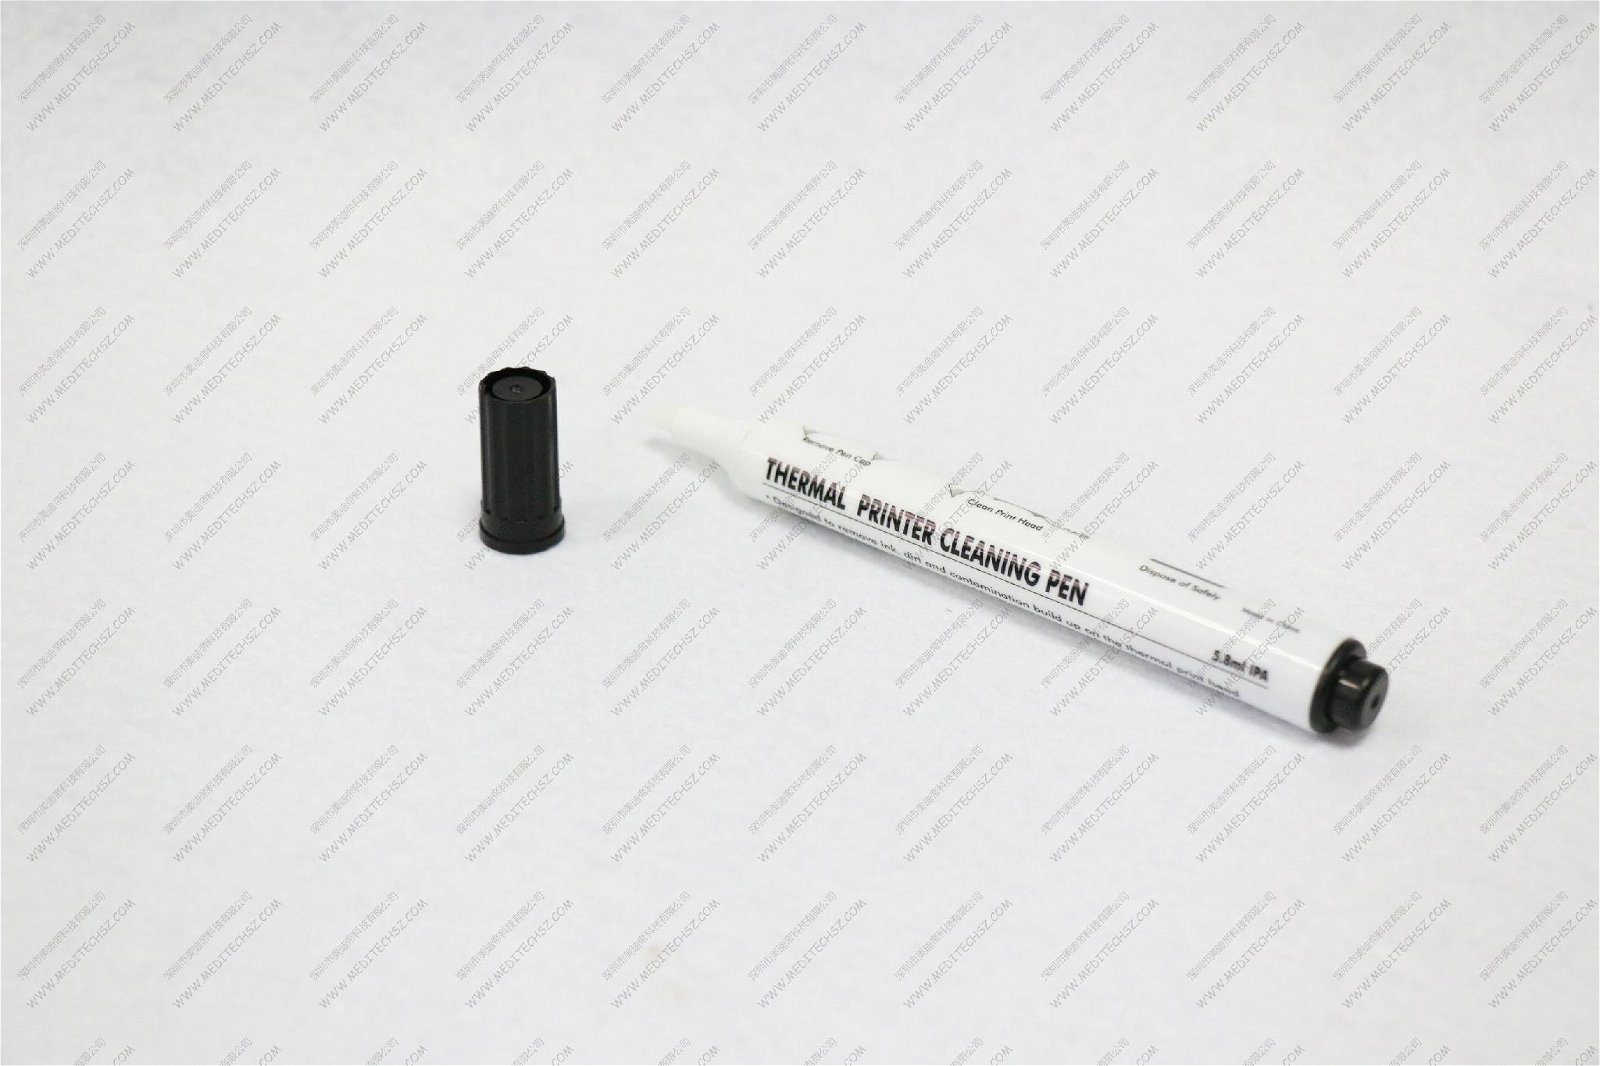 Thermal printer cleaning pen IPACP-03 3